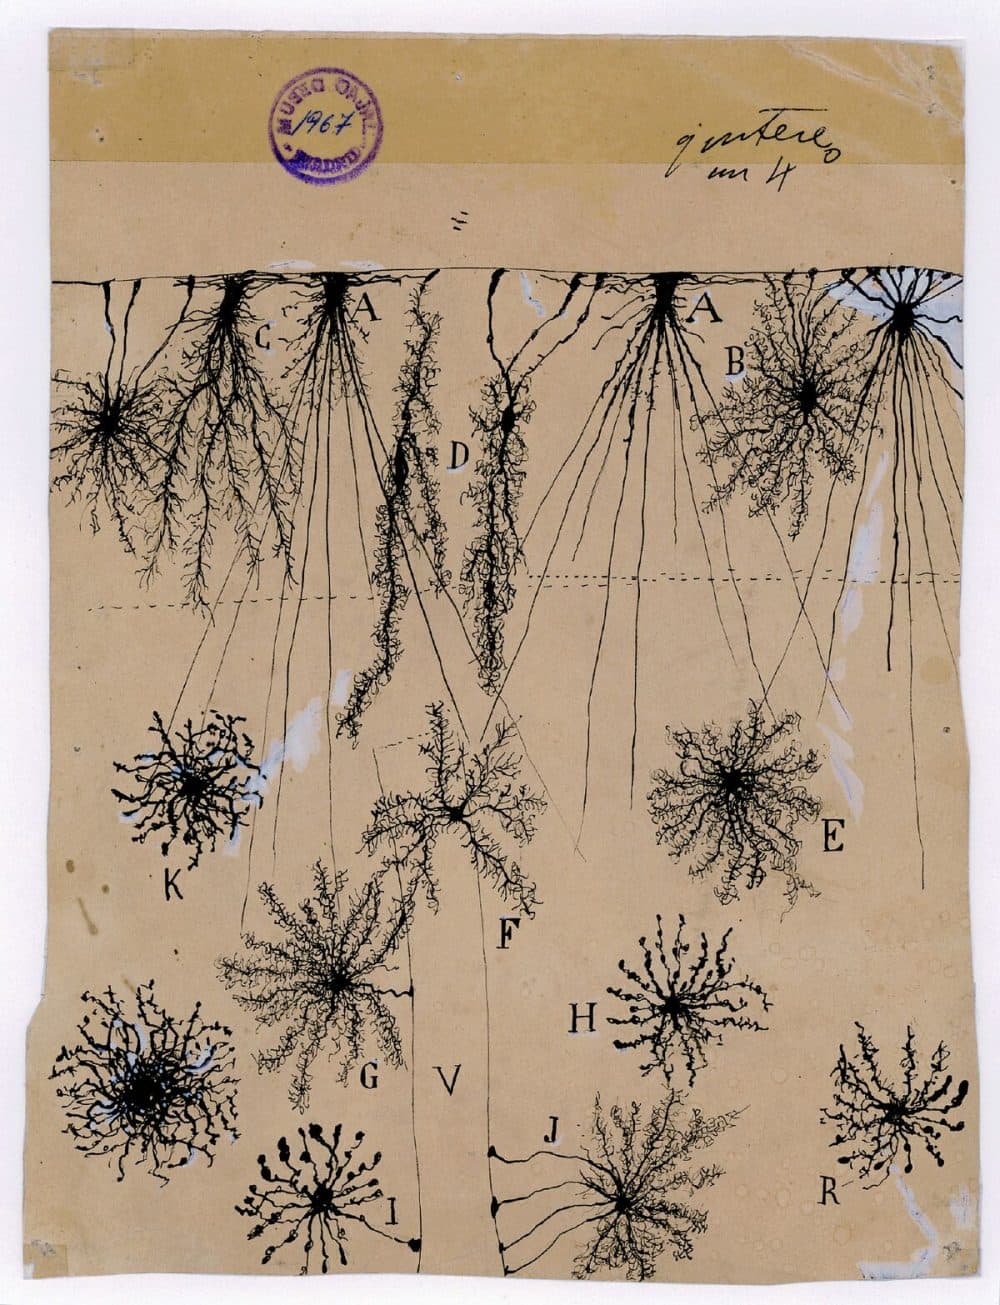 Santiago Ramón y Cajal's ink and pencil drawing of glial cells of the cerebral cortex of a child, created in 1904. (Courtesy of Instituto Cajal)